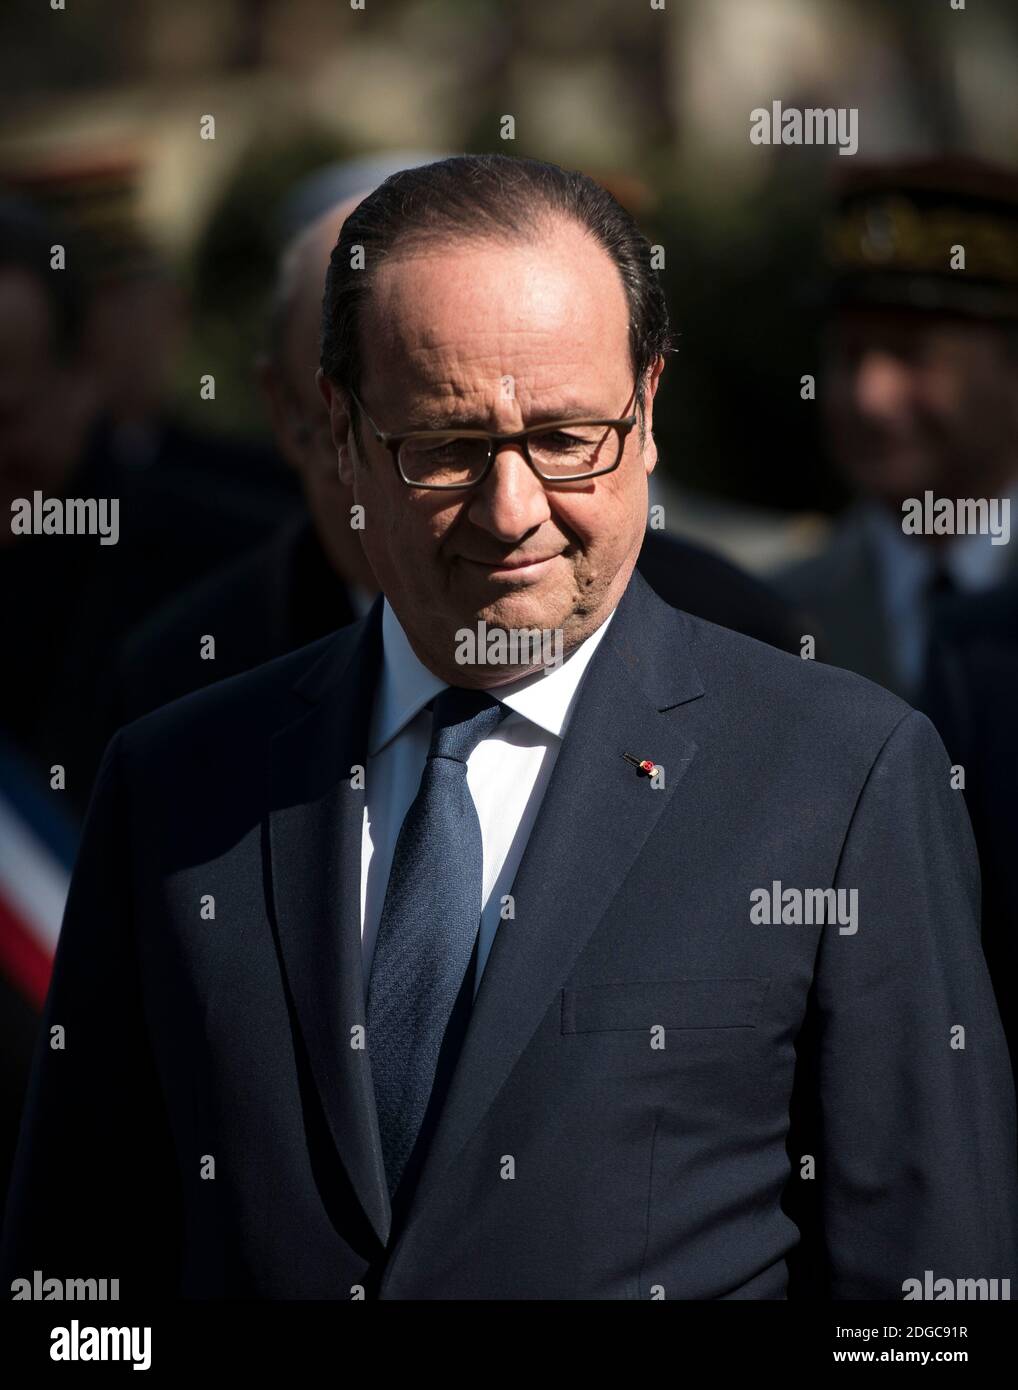 Portrait French President Francois Hollande inaugurates a memorial in honor of French soldiers killed in foreign military operations (OPEX), at Parc Andre Citroen in Paris, France on April 18, 2017. Photo by Eliot Blondet/ABACARESS.COM Stock Photo